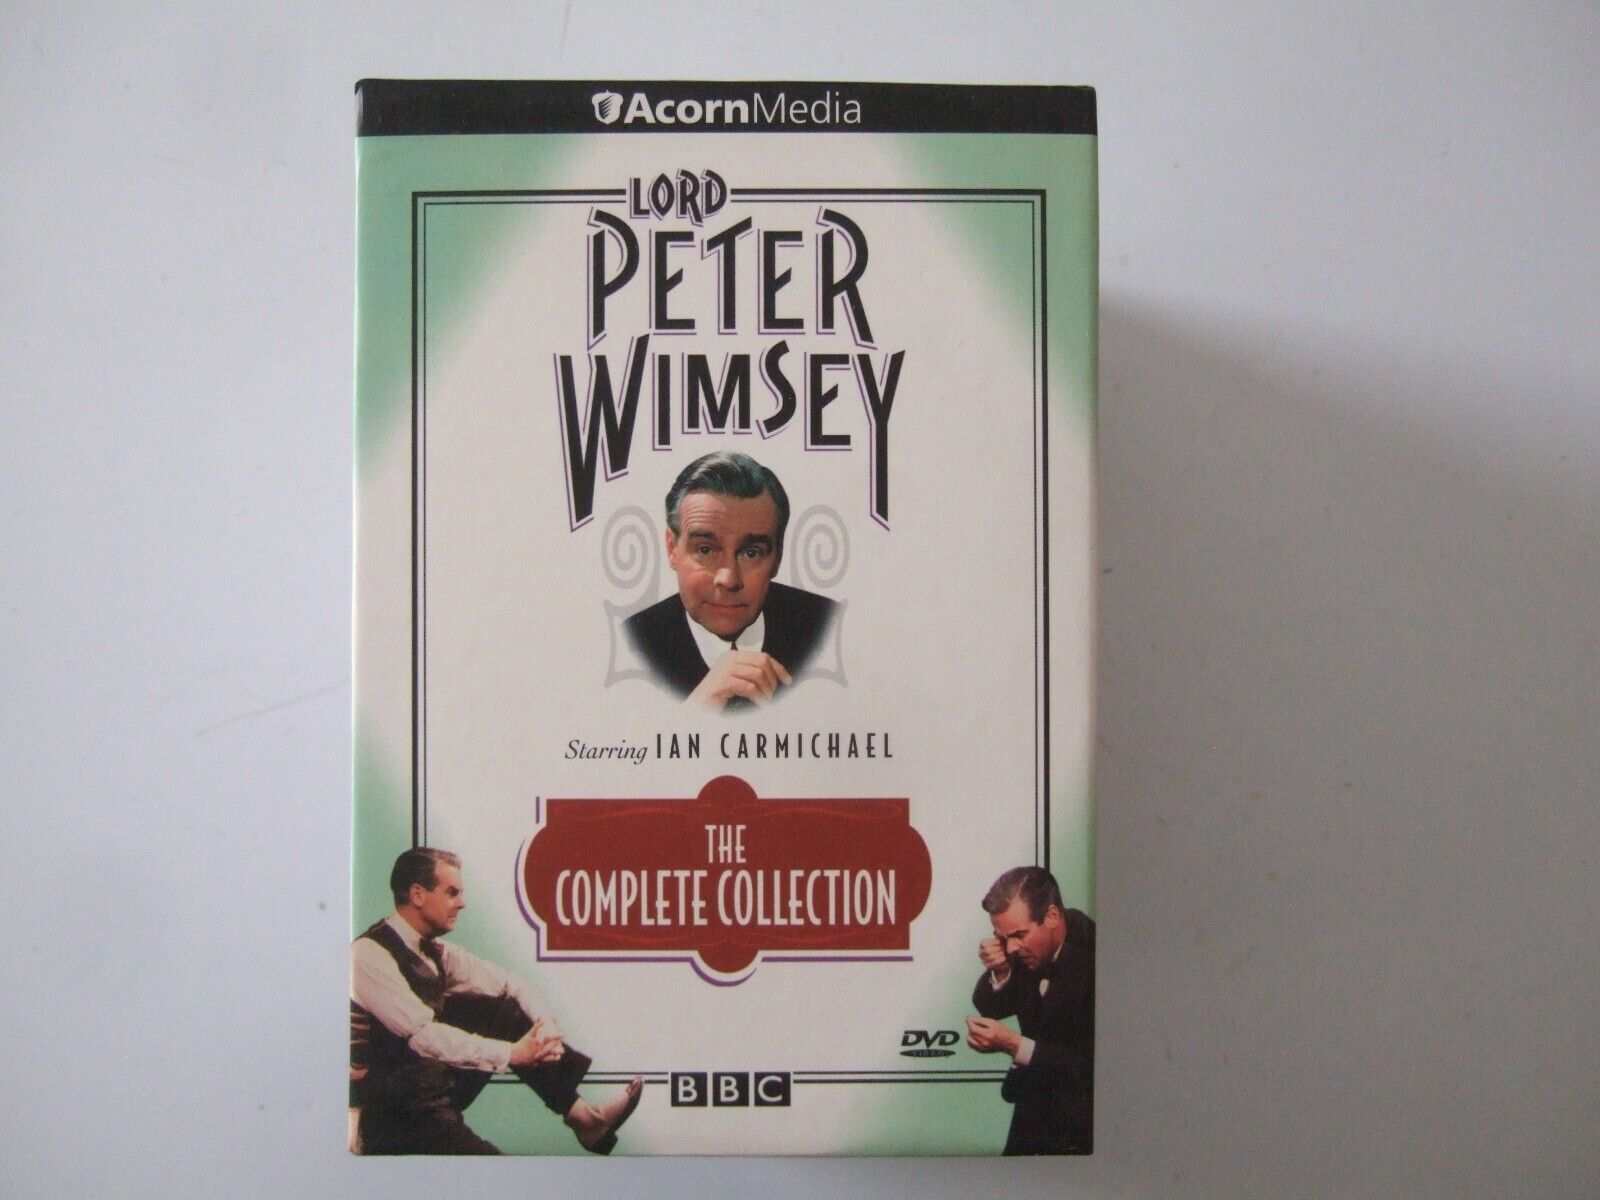 ACORN MEDIA   LORD PETER WIMSEY  THE COMPLETE BBC COLLECTION  MISSING 1 DISC - $24.30